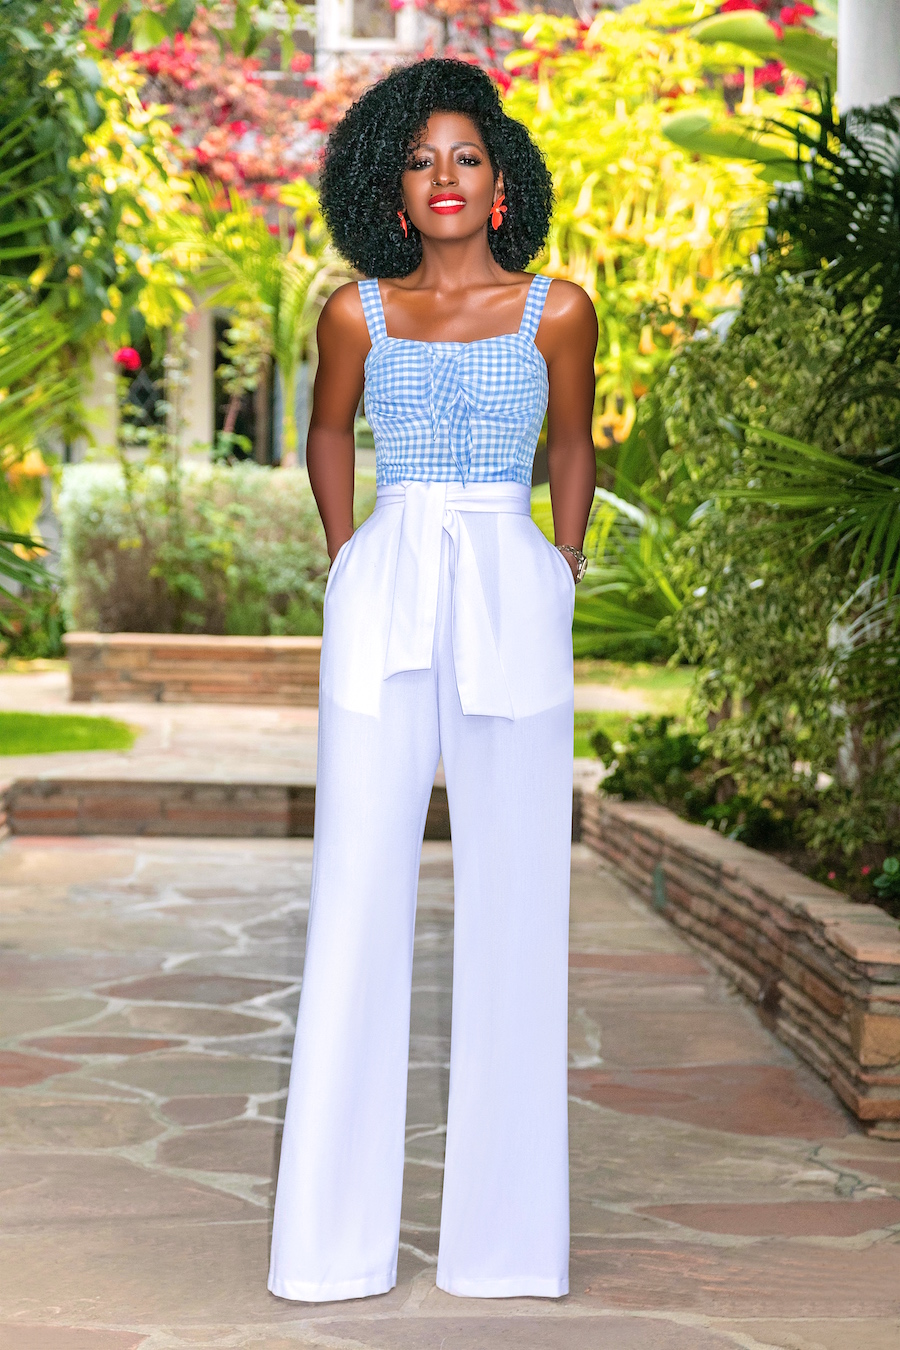 Style Pantry | Gingham Tank + High Waist Belted Pants